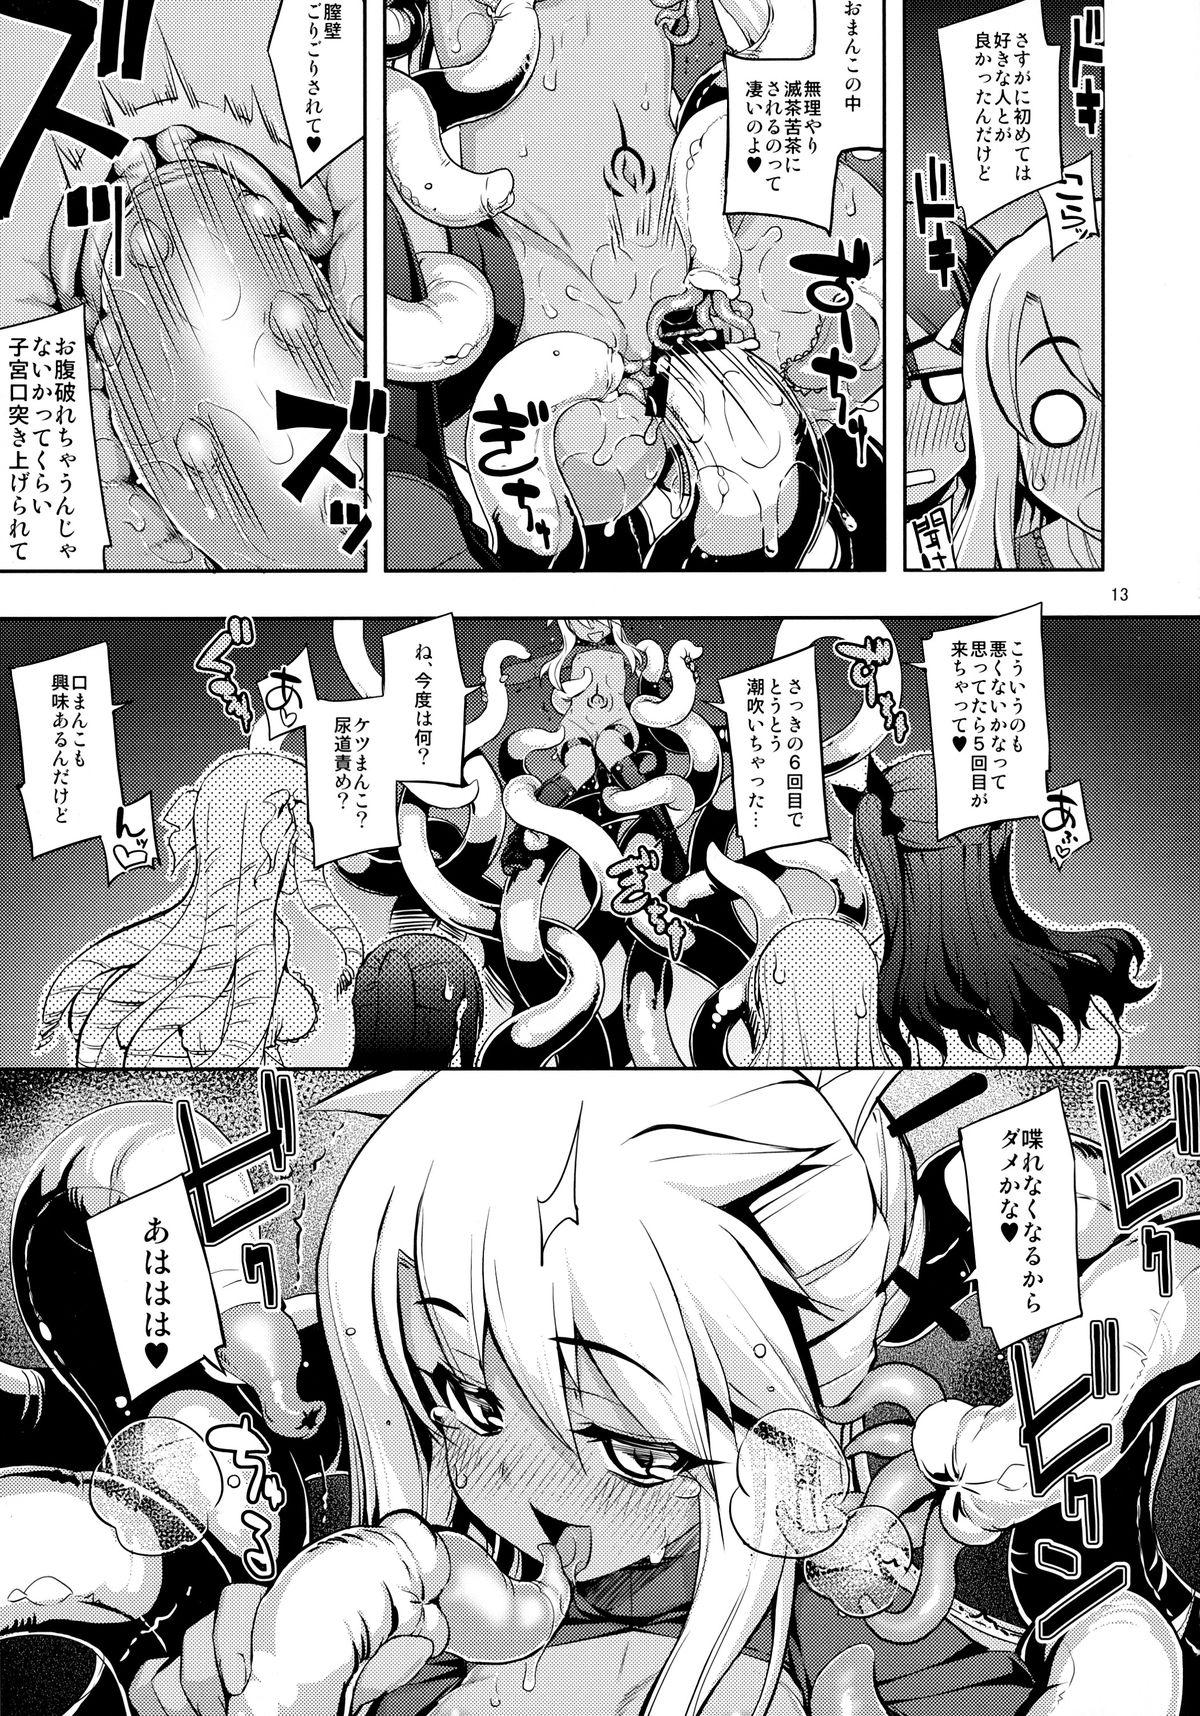 Penetration RE20 - Fate kaleid liner prisma illya Doublepenetration - Page 13